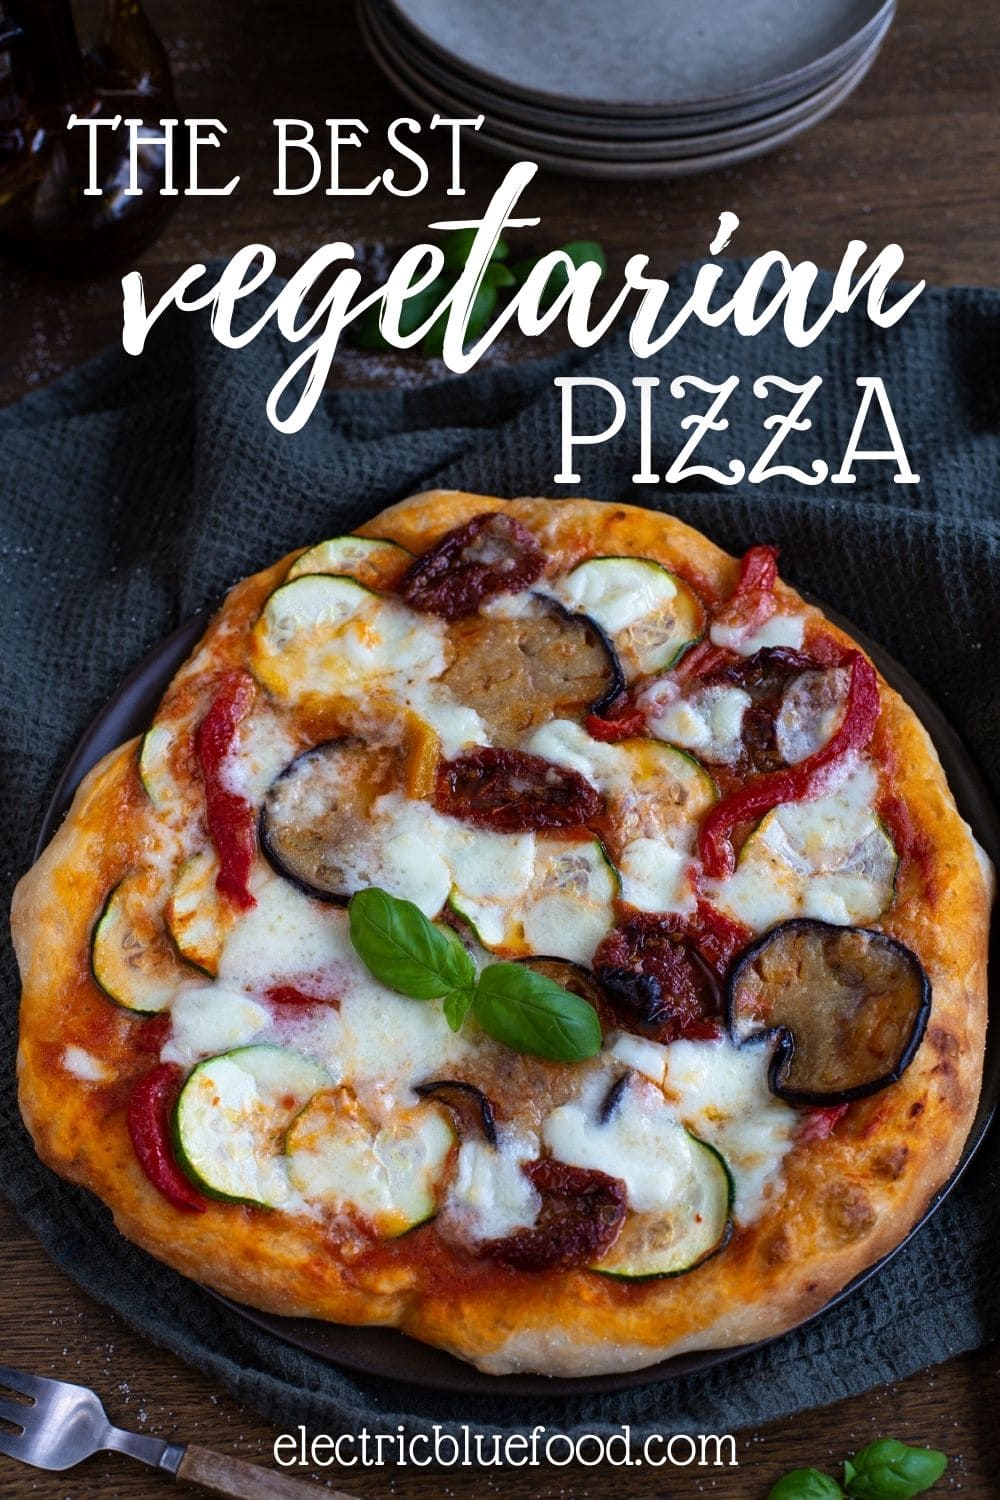 Pizza ortolana with ggplant, zucchini, roasted peppers, sun-dried tomatoes and buffalo mozzarella is the best vegetarian pizza you will try.